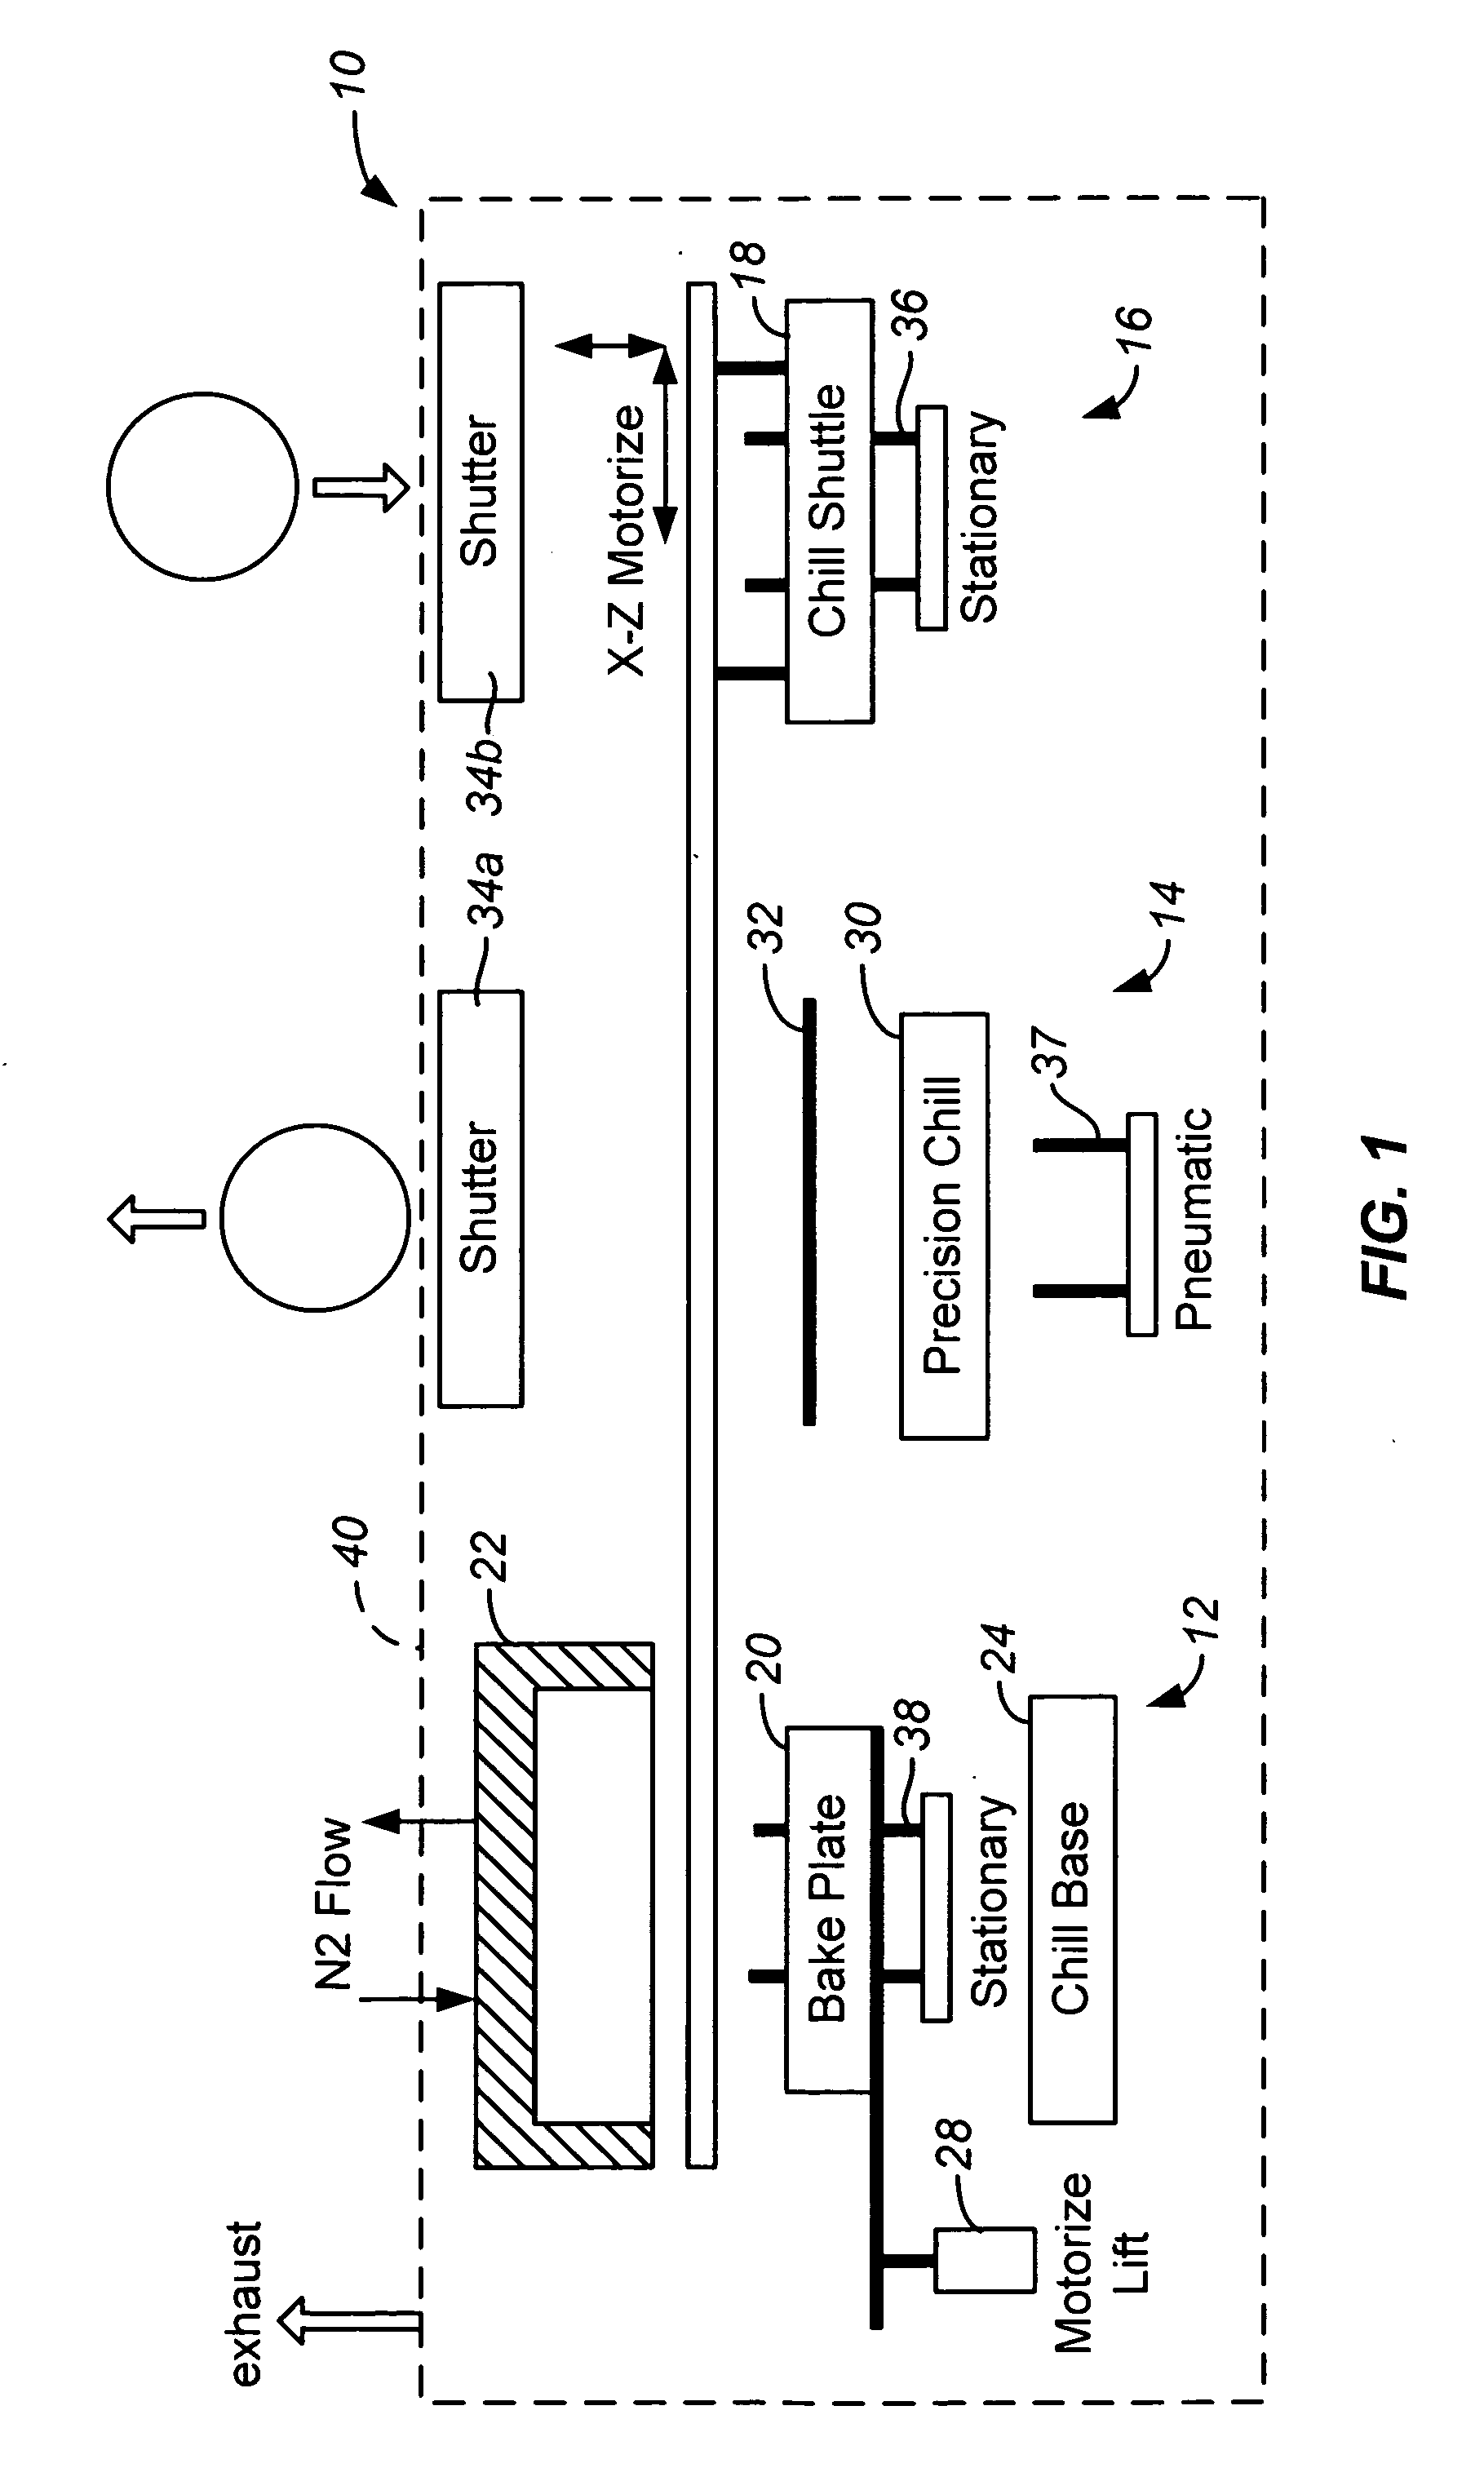 Bake plate having engageable thermal mass